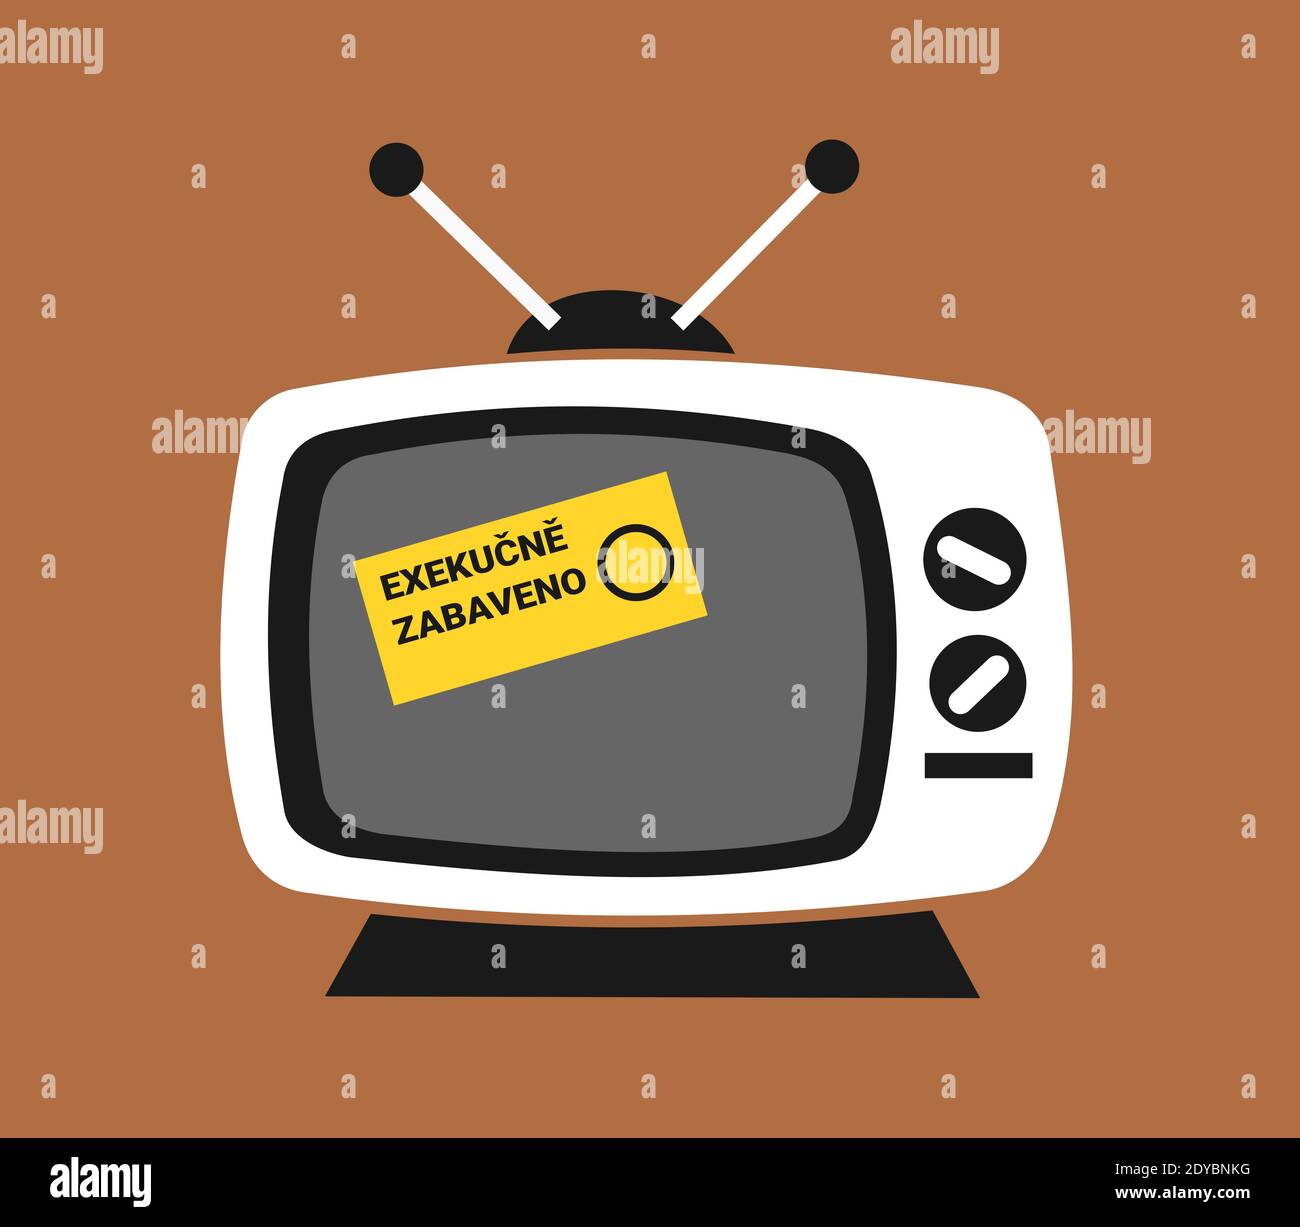 Exekucne zabaveno (translation from czech: executory confiscation). television is taken because of financial debt and insolvency Stock Photo